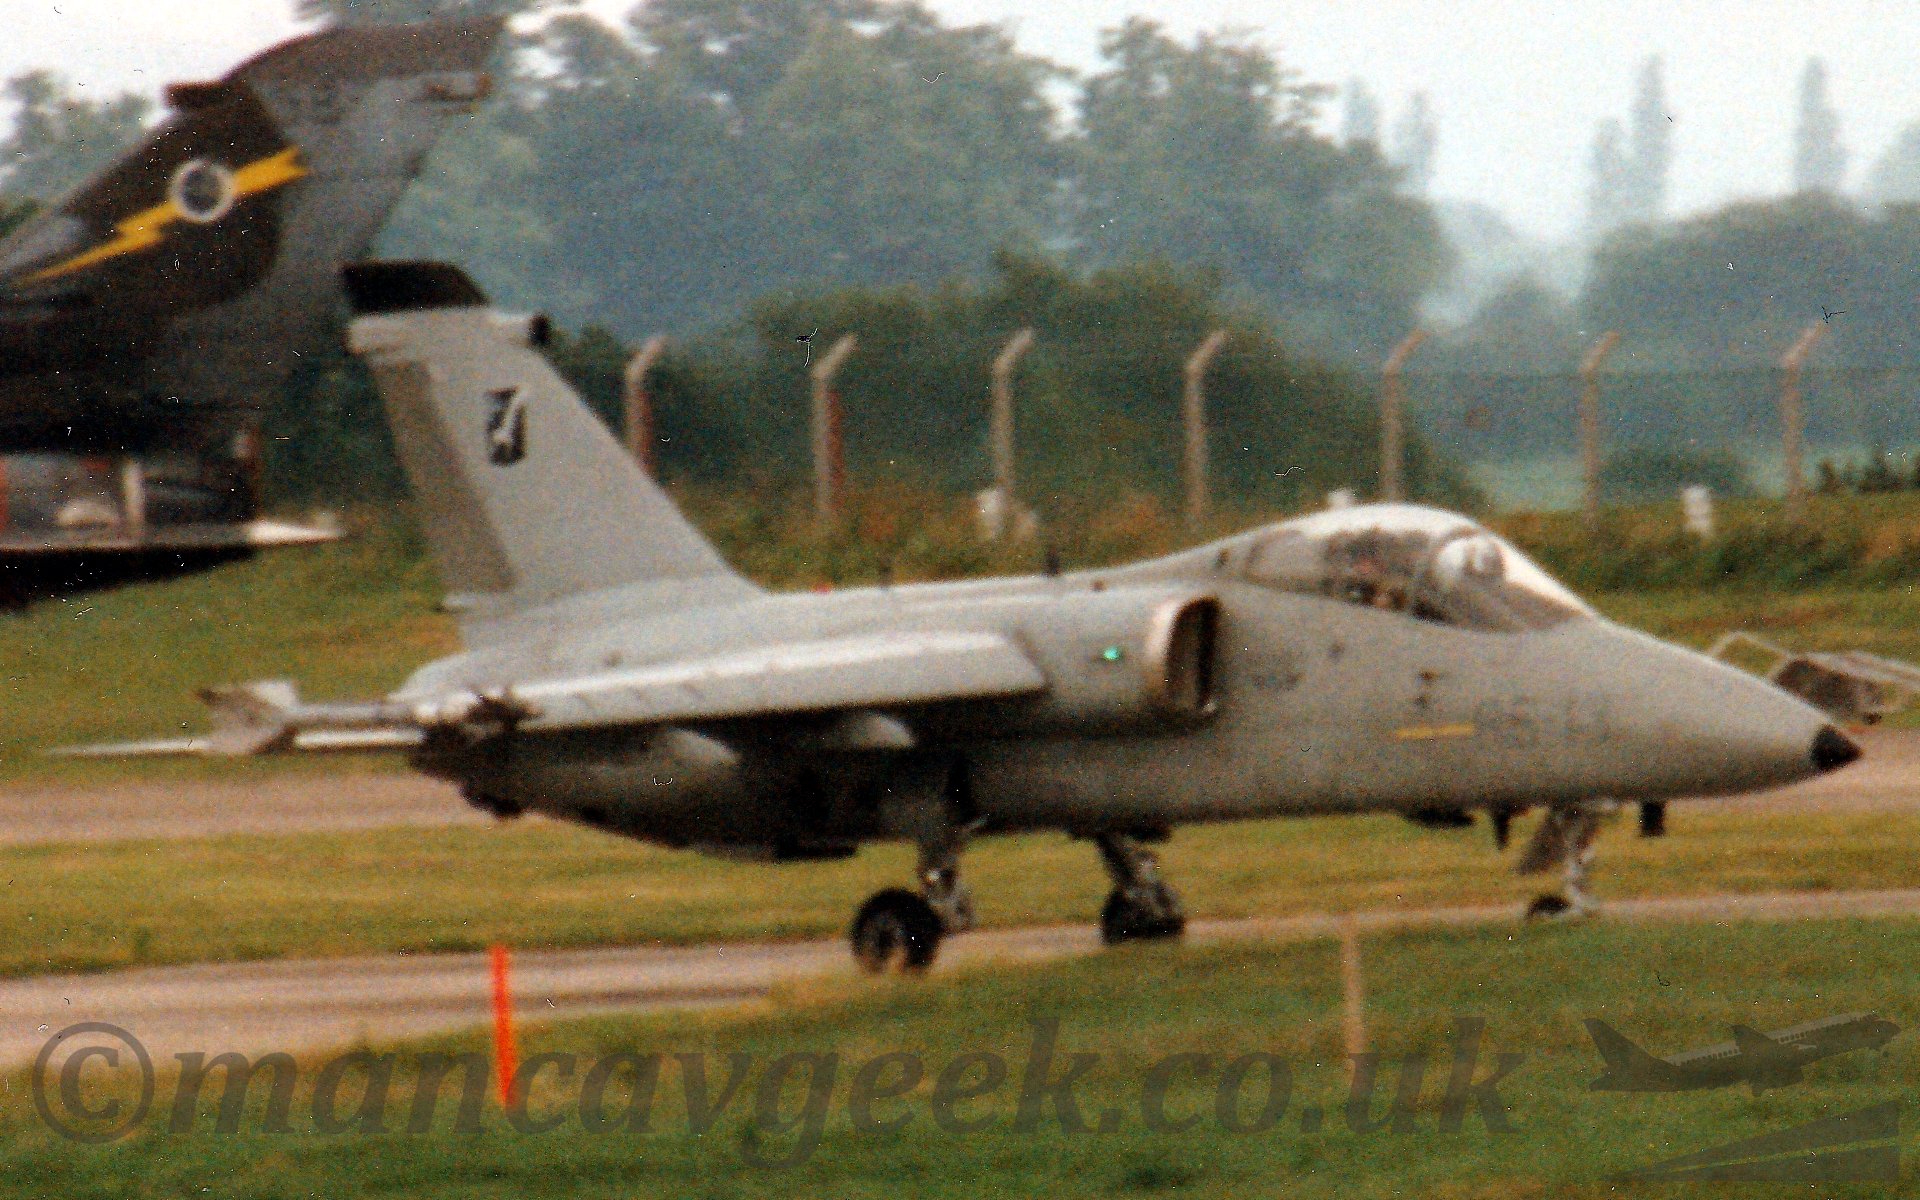 Side view of a single seat, single enginedattack jet aircraft taxiing from left to right. The plane is almost entirely grey, except for the extensively glazed cockpit canopy. There are engine intakes tigh up on the sides of the fuselage, just aft of the cockpit, with the wings coming straight out of the intake. There are missiles carried on the wingtips. The tail has a black badge with a silver eagle flying to the left. In the background, the tail of another plane, with green and grey camouflage and a yellow lightning flash on the tail, is just poking into the frame on the left. There is a chainlink fence mounted on conctrete posts running across most of the frame, with trees and bushes behind it, all under a grey sky. The photo is, unfortunately, rather grainy, so a lot of detail has been lost.